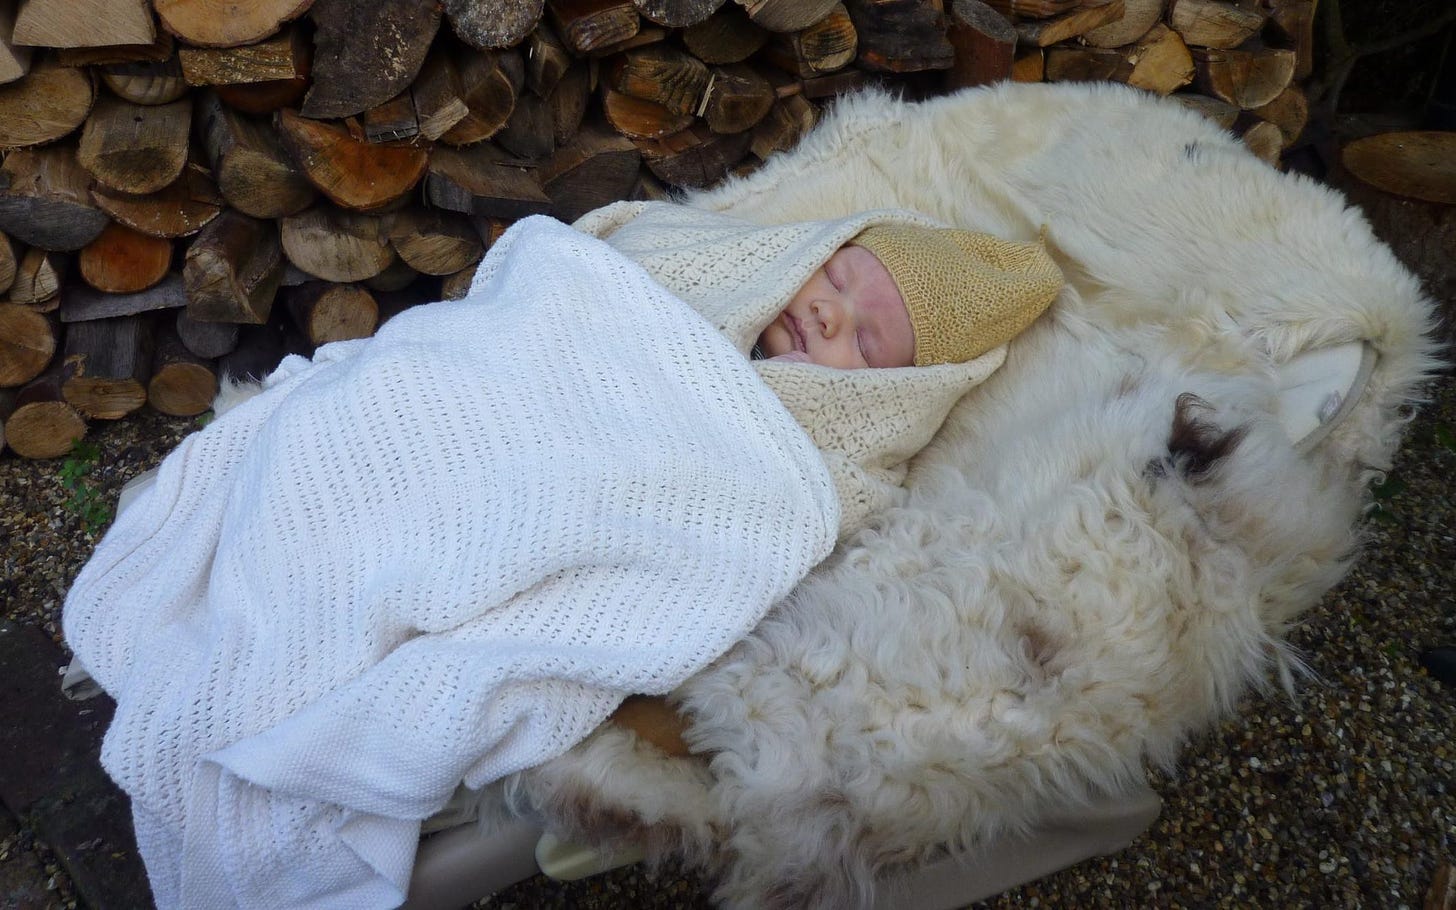 Return to old habits as babies encouraged to sleep outside in fresh air